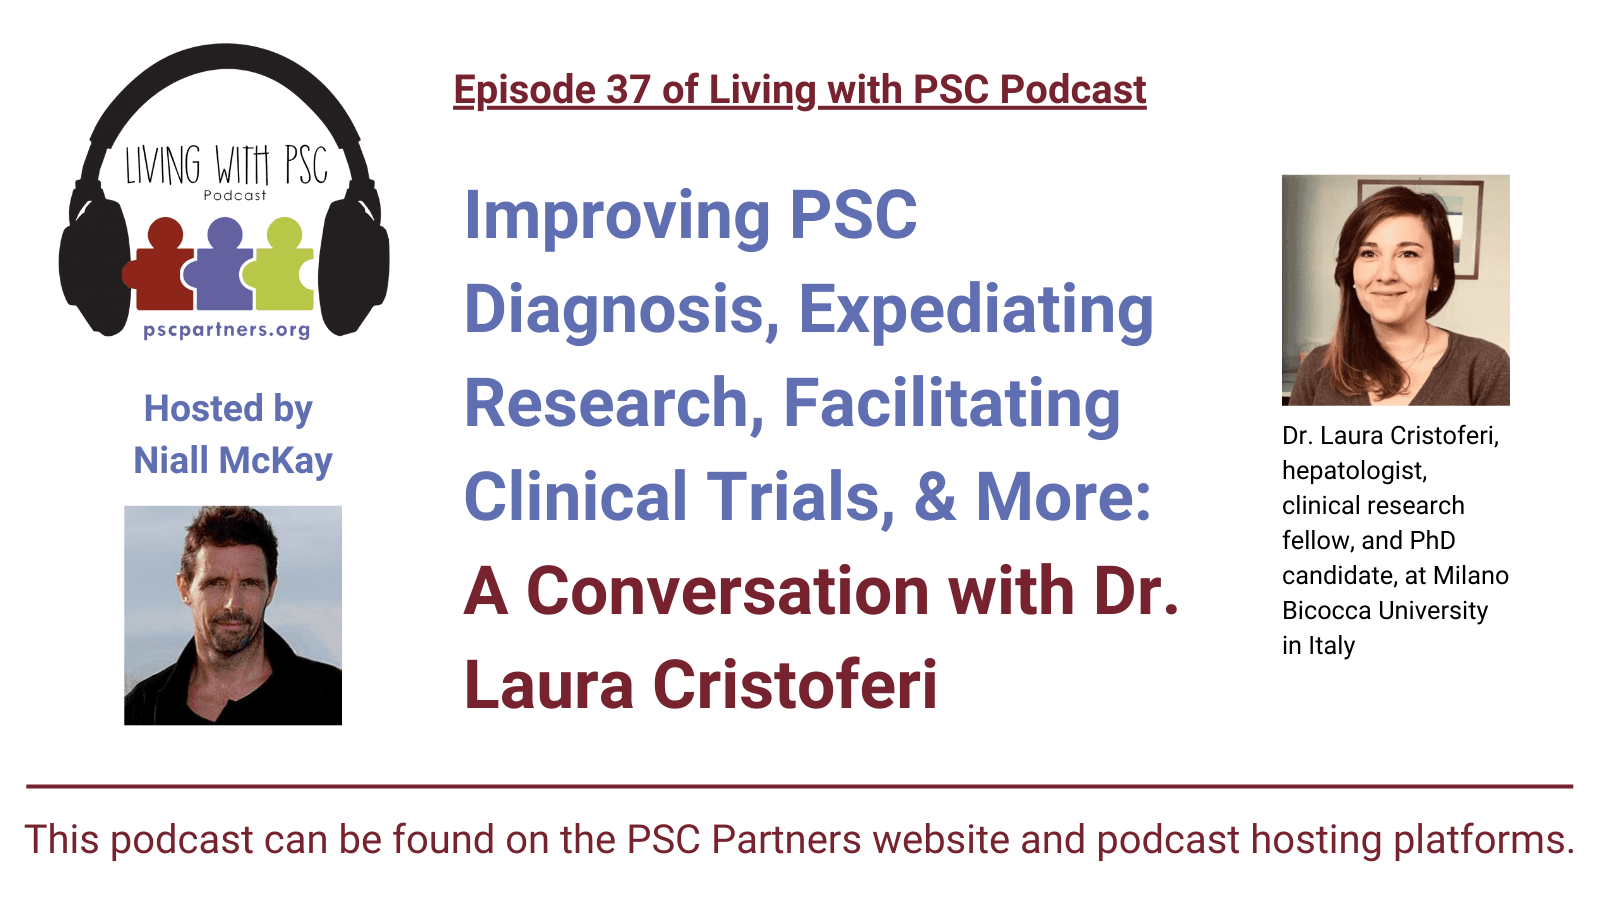 Living with PSC Podcast Episode #37